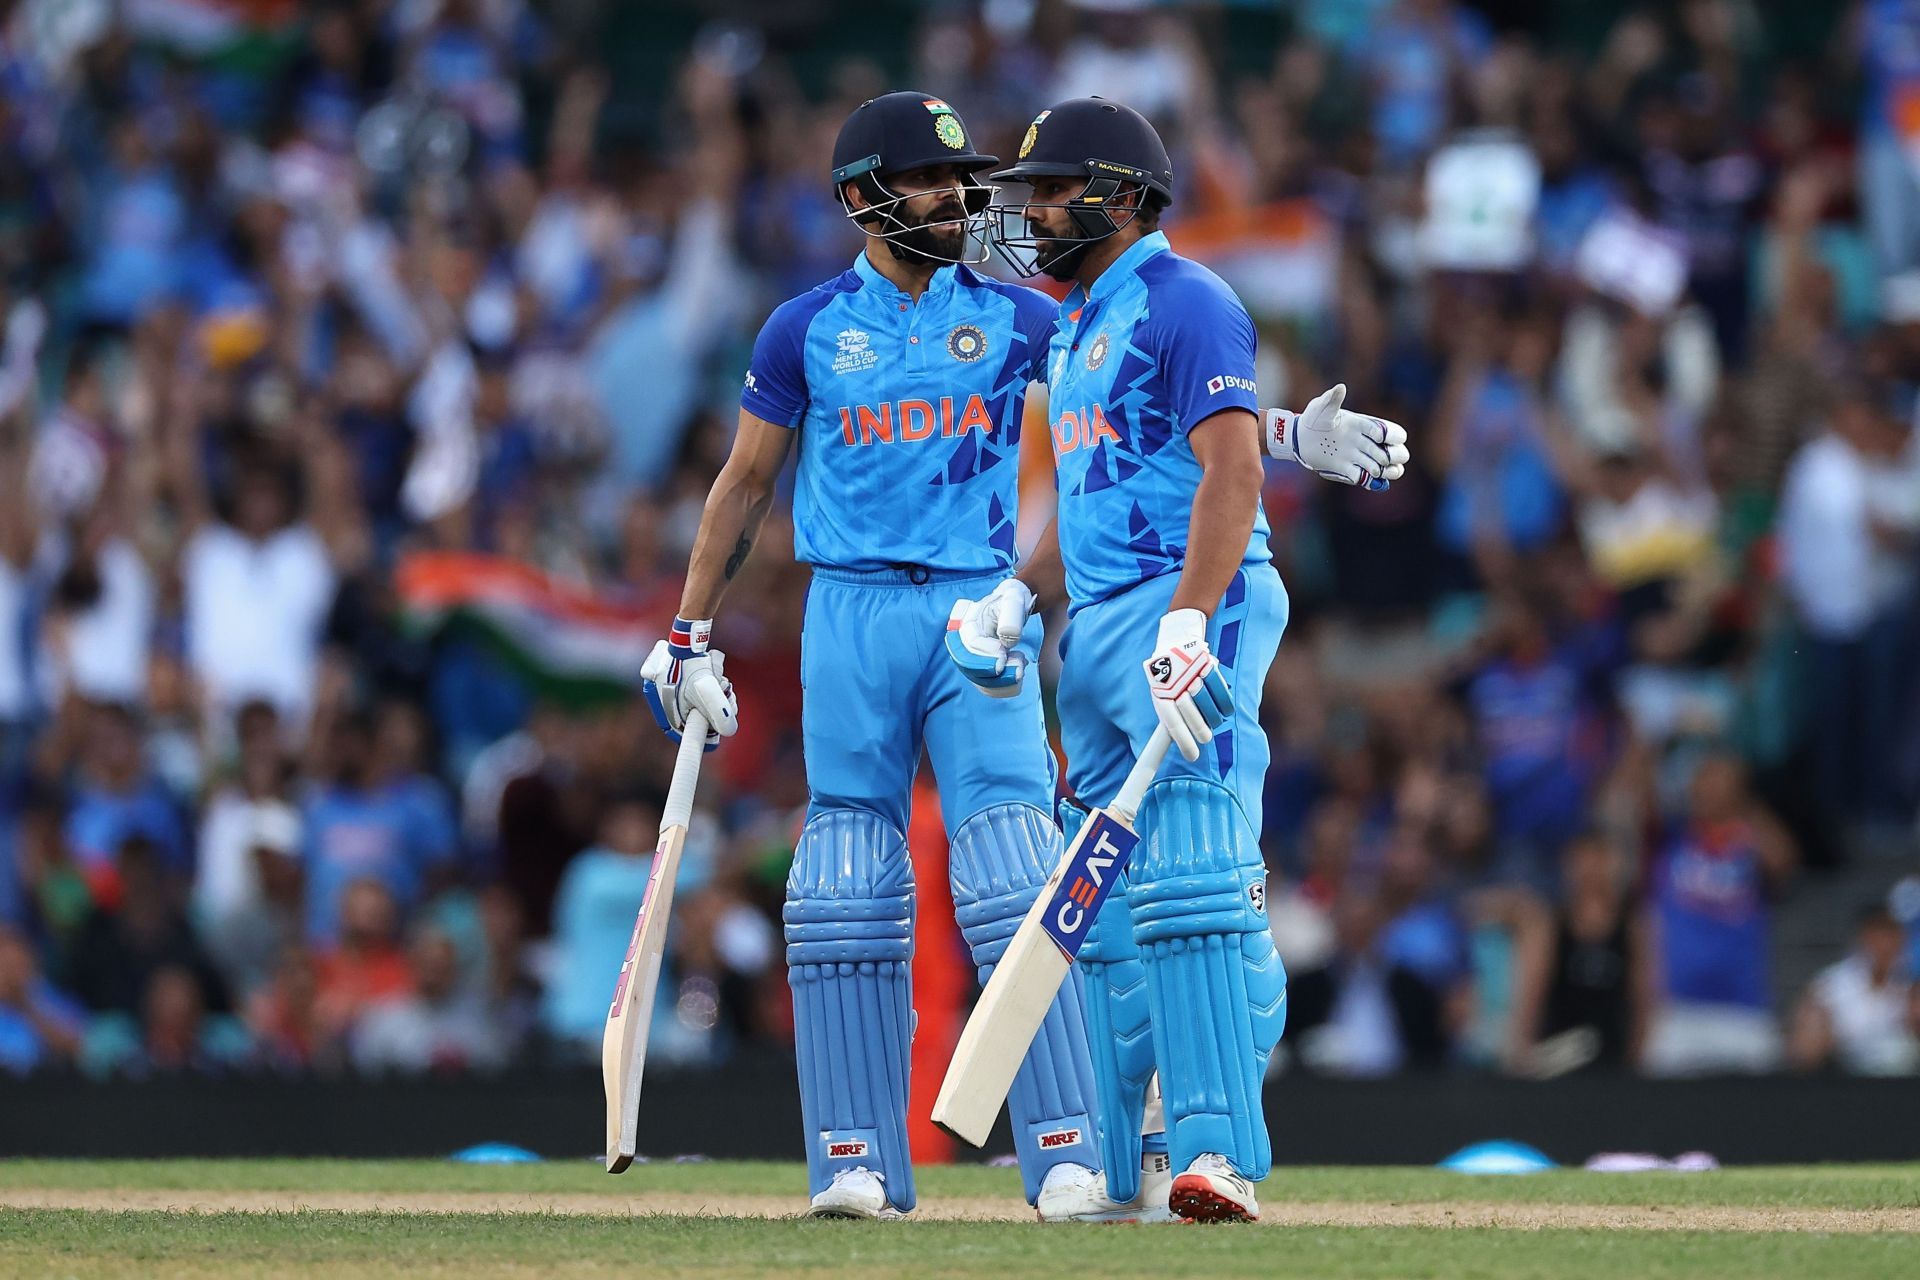 Virat Kohli and Rohit Sharma continue to hold the aces for Team India